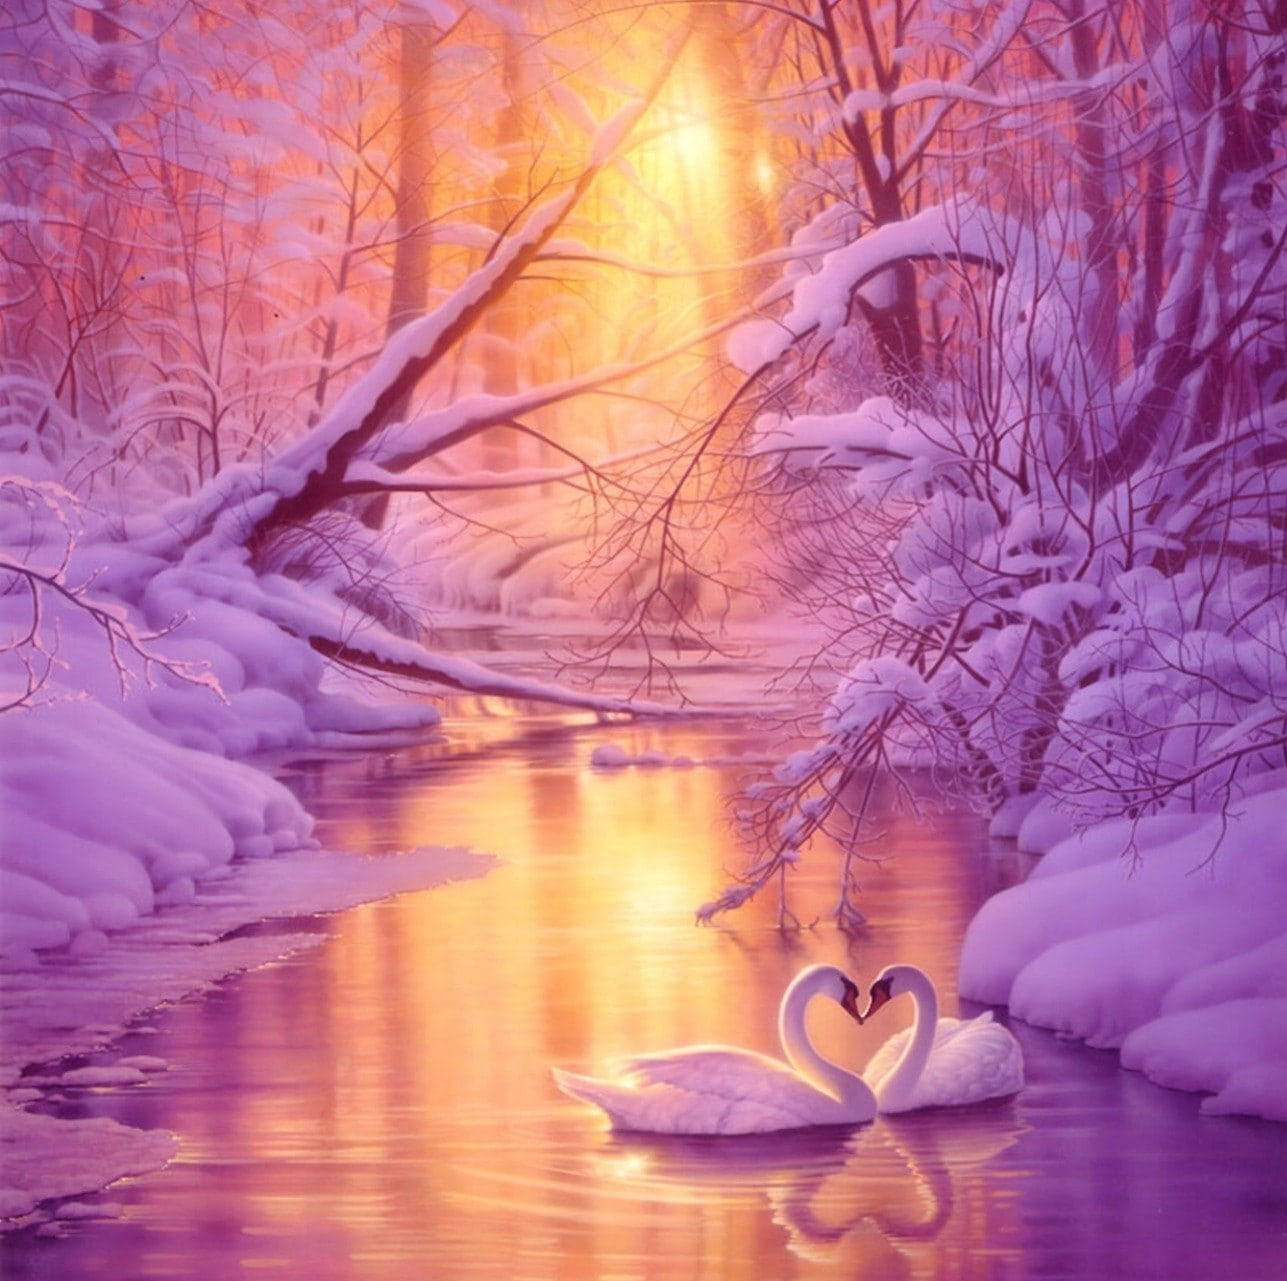 Swans In Snow Love Nature Background